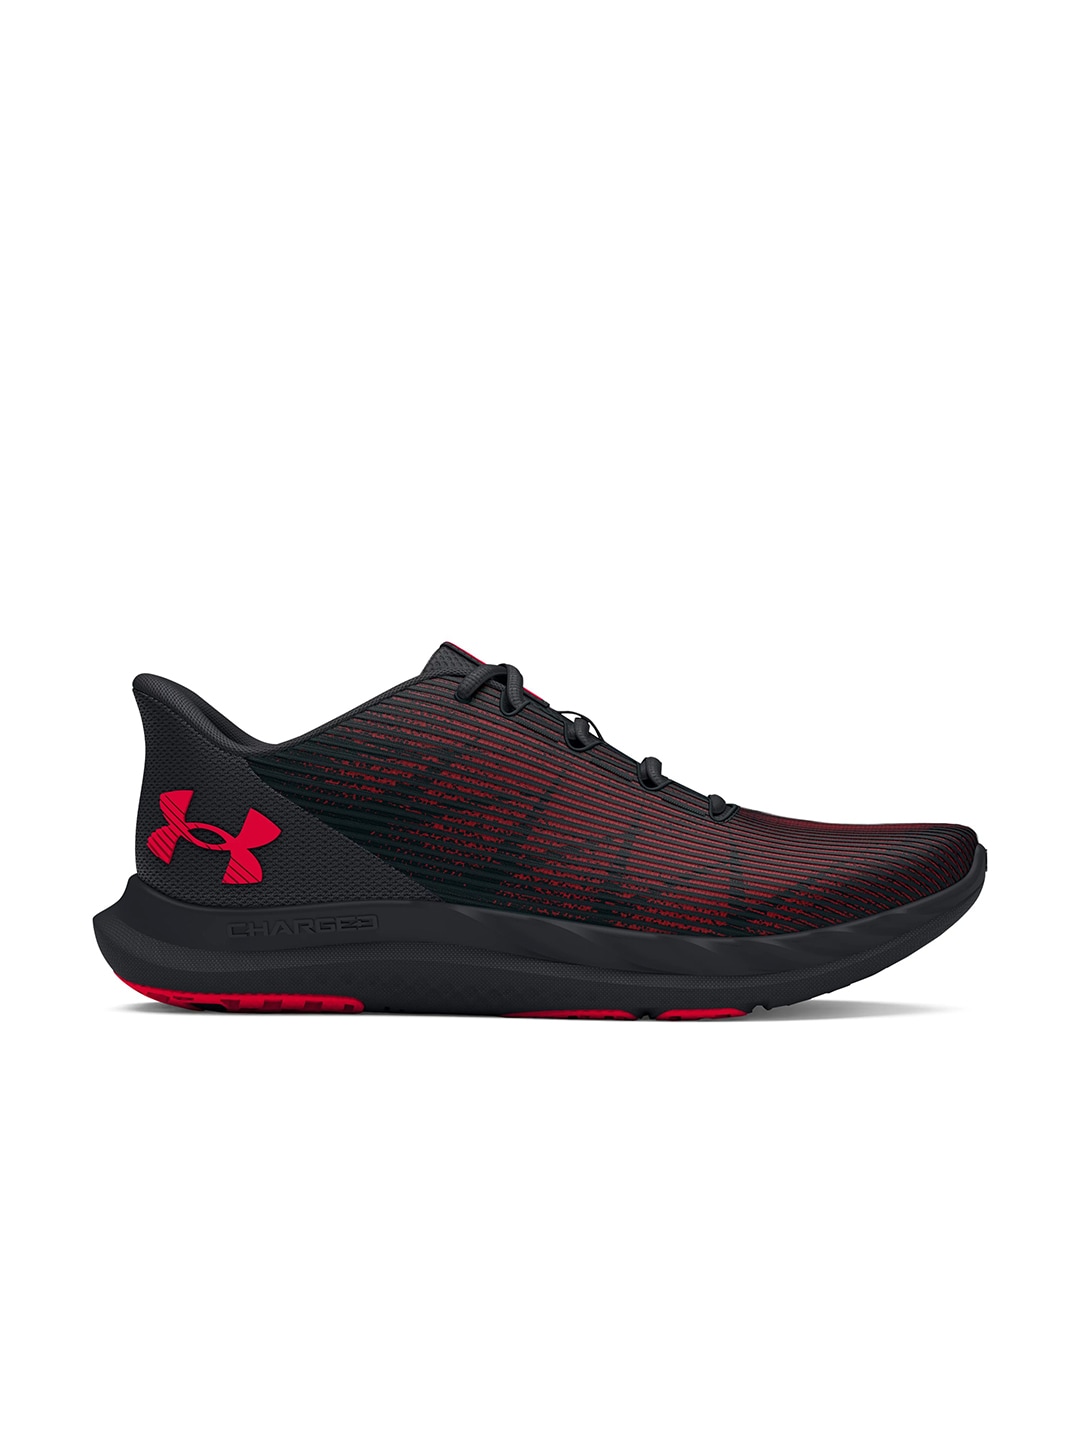 UNDER ARMOUR Men Woven Design Charged Speed Swift Running Shoes